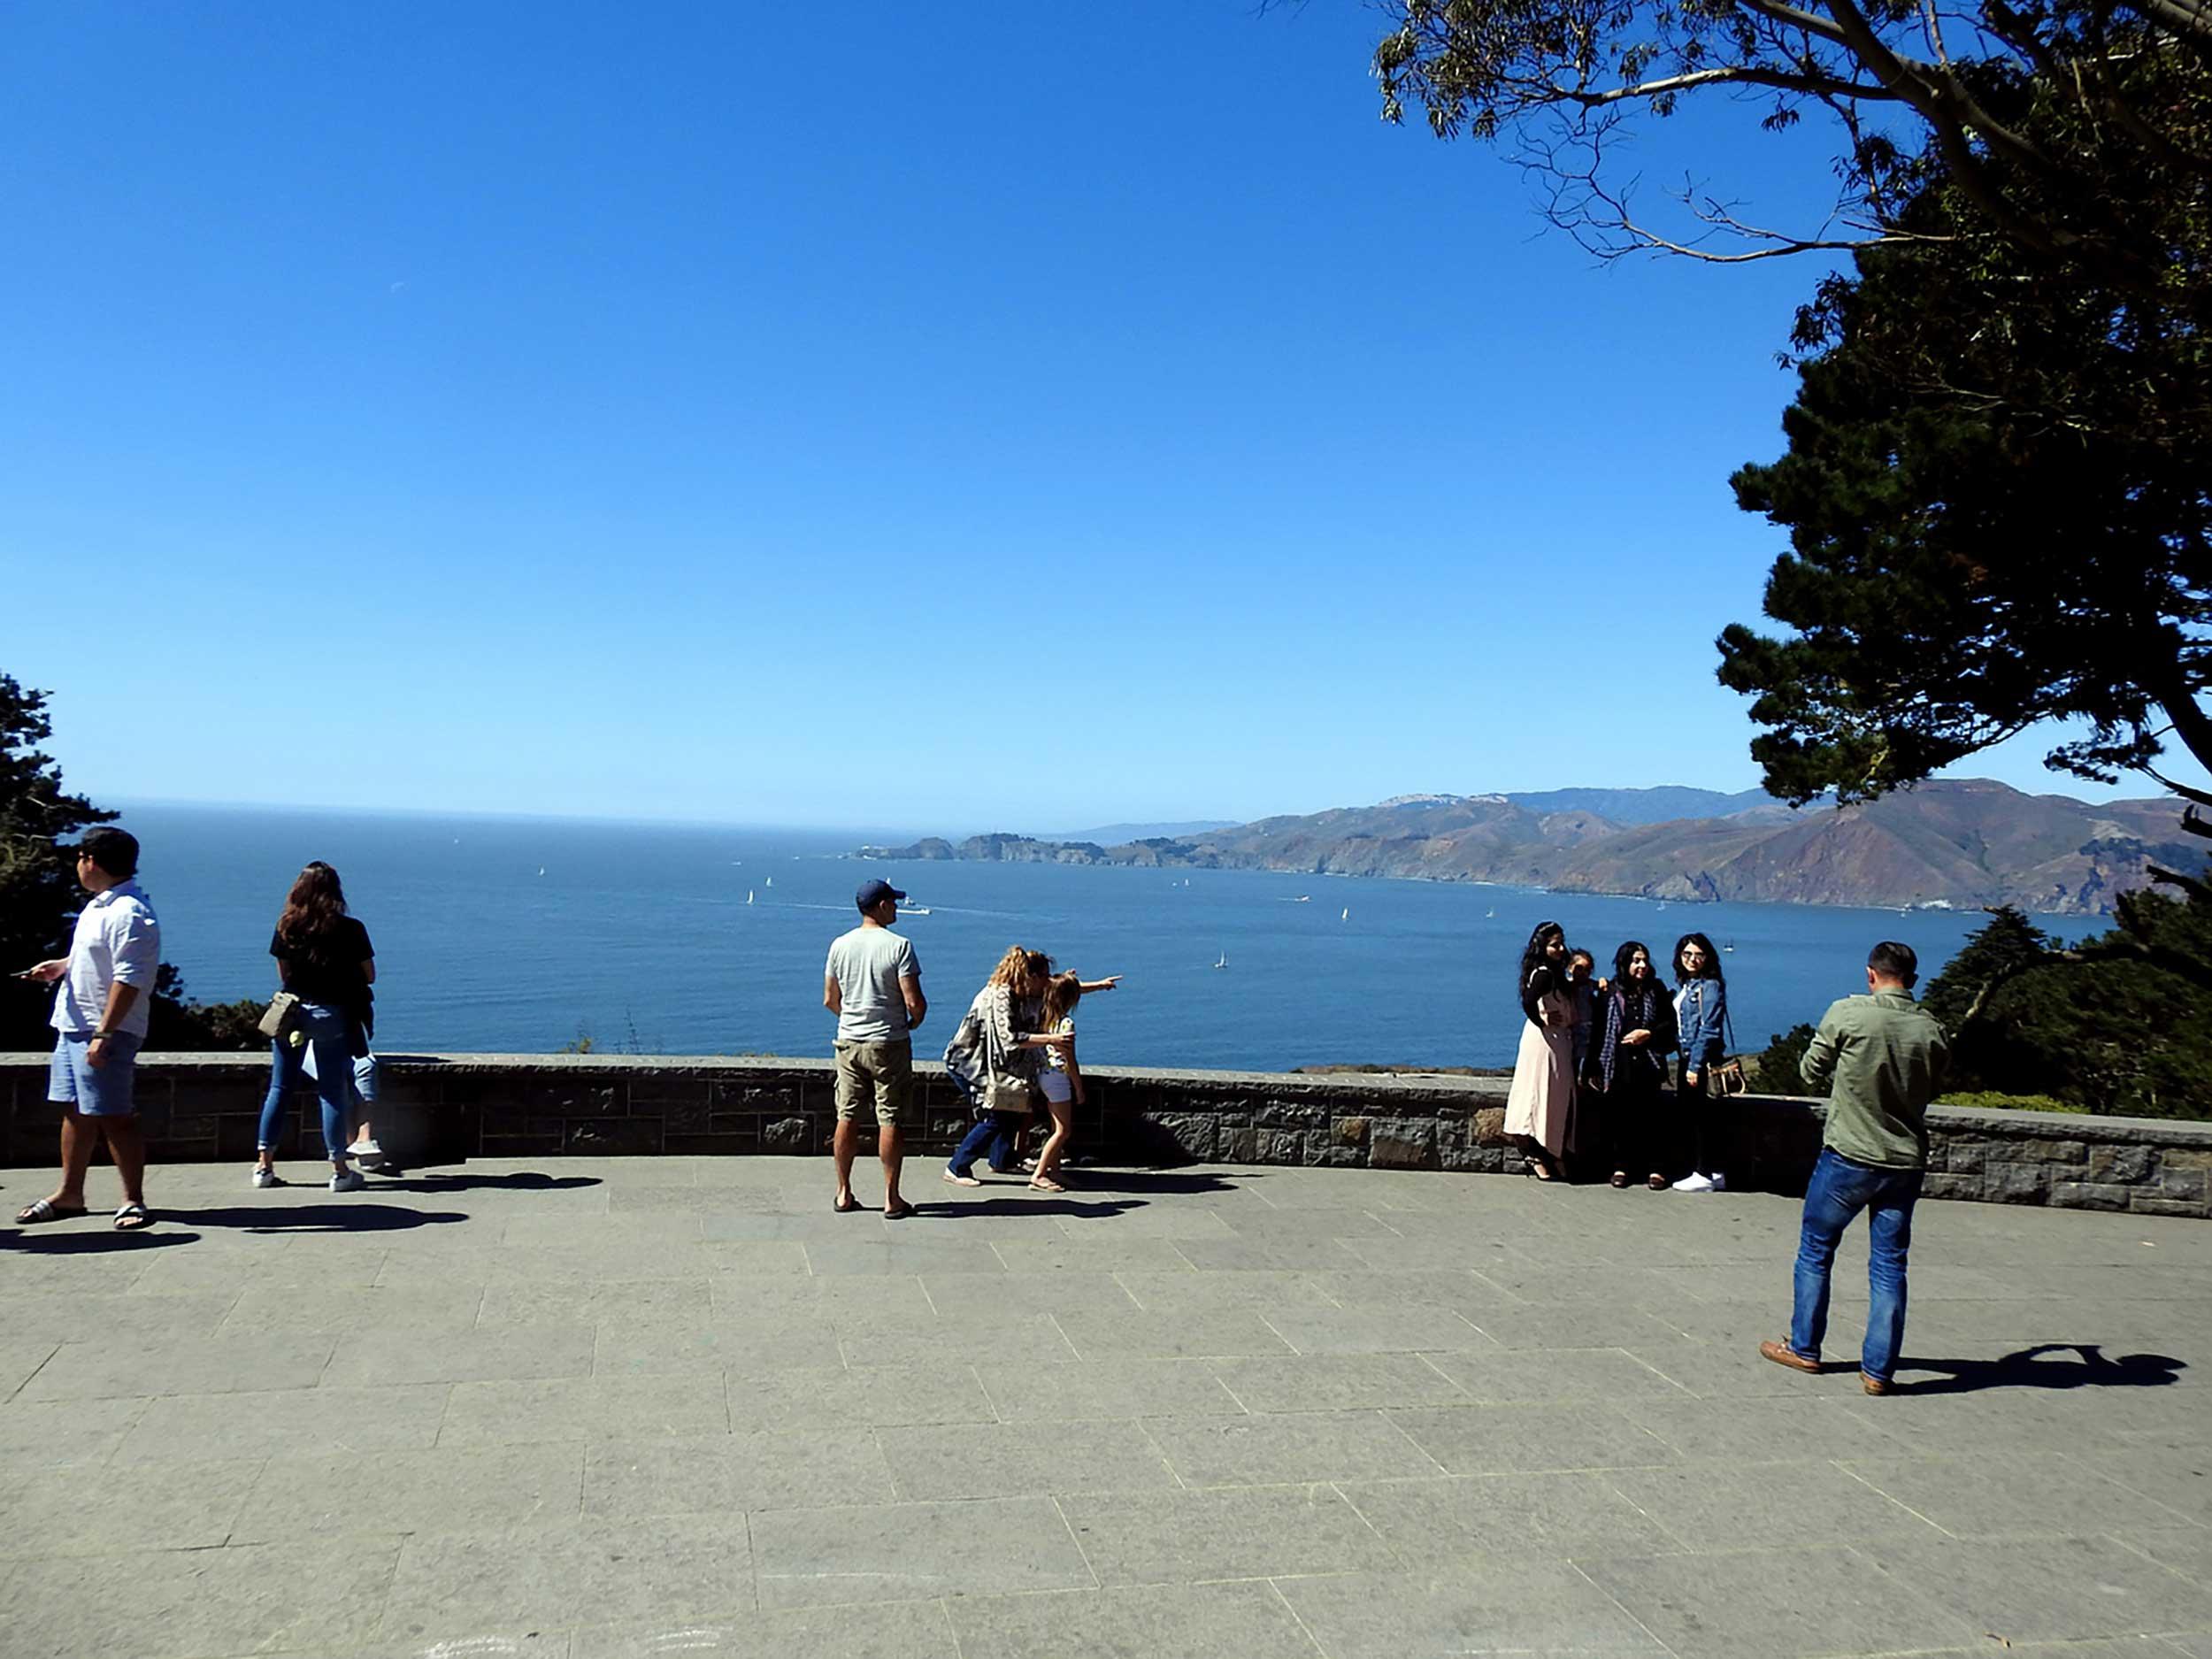 People enjoying the view from Immigrant Point Overlook in the Presidio.